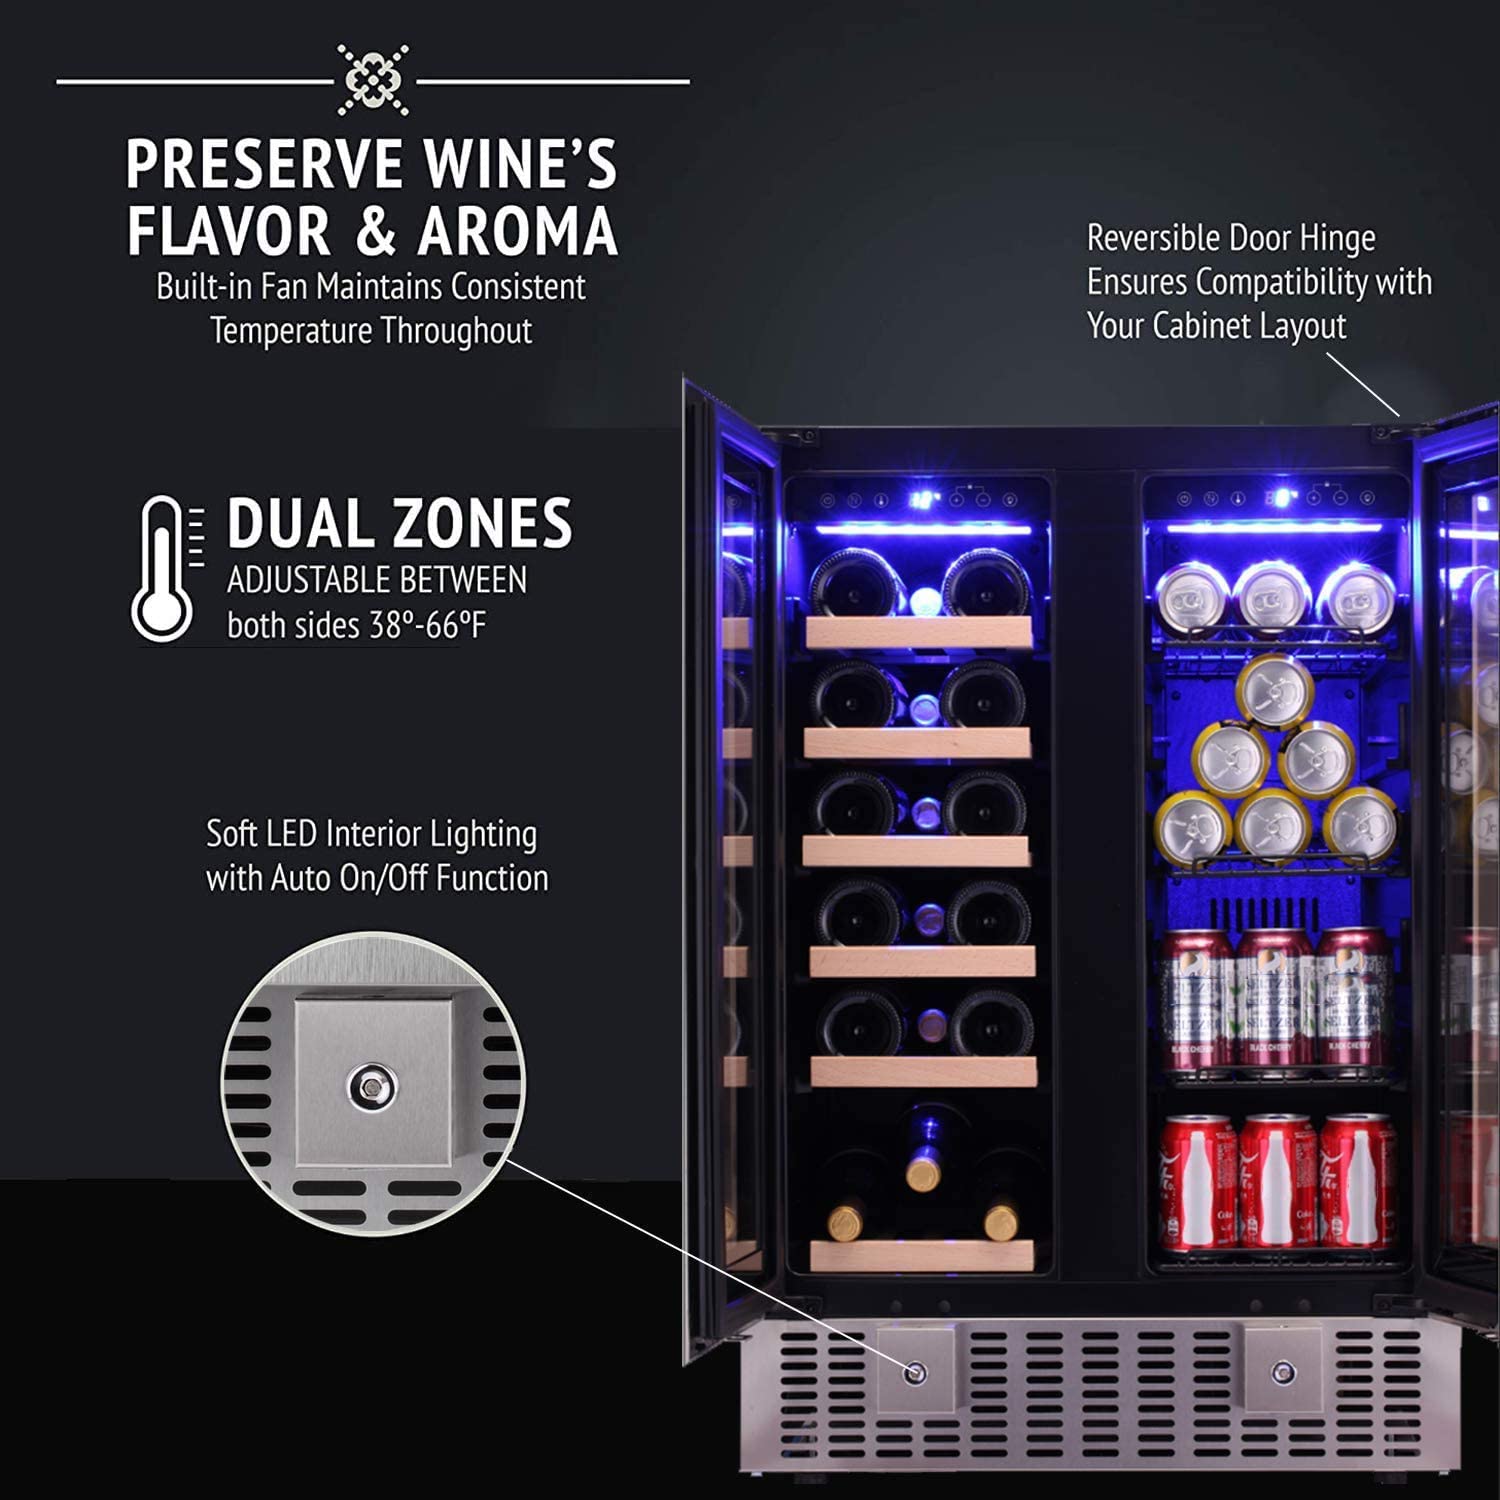 10 Best 24 Inch Wine and Beverage Cooler Refrigerator 2022: Top Undercounter Built-in Fridges All In One Cooling Gear Lab: Any Refrigerators Air Conditioners Freezers Ice Makers Coolers Fans Reviewed And Compared.